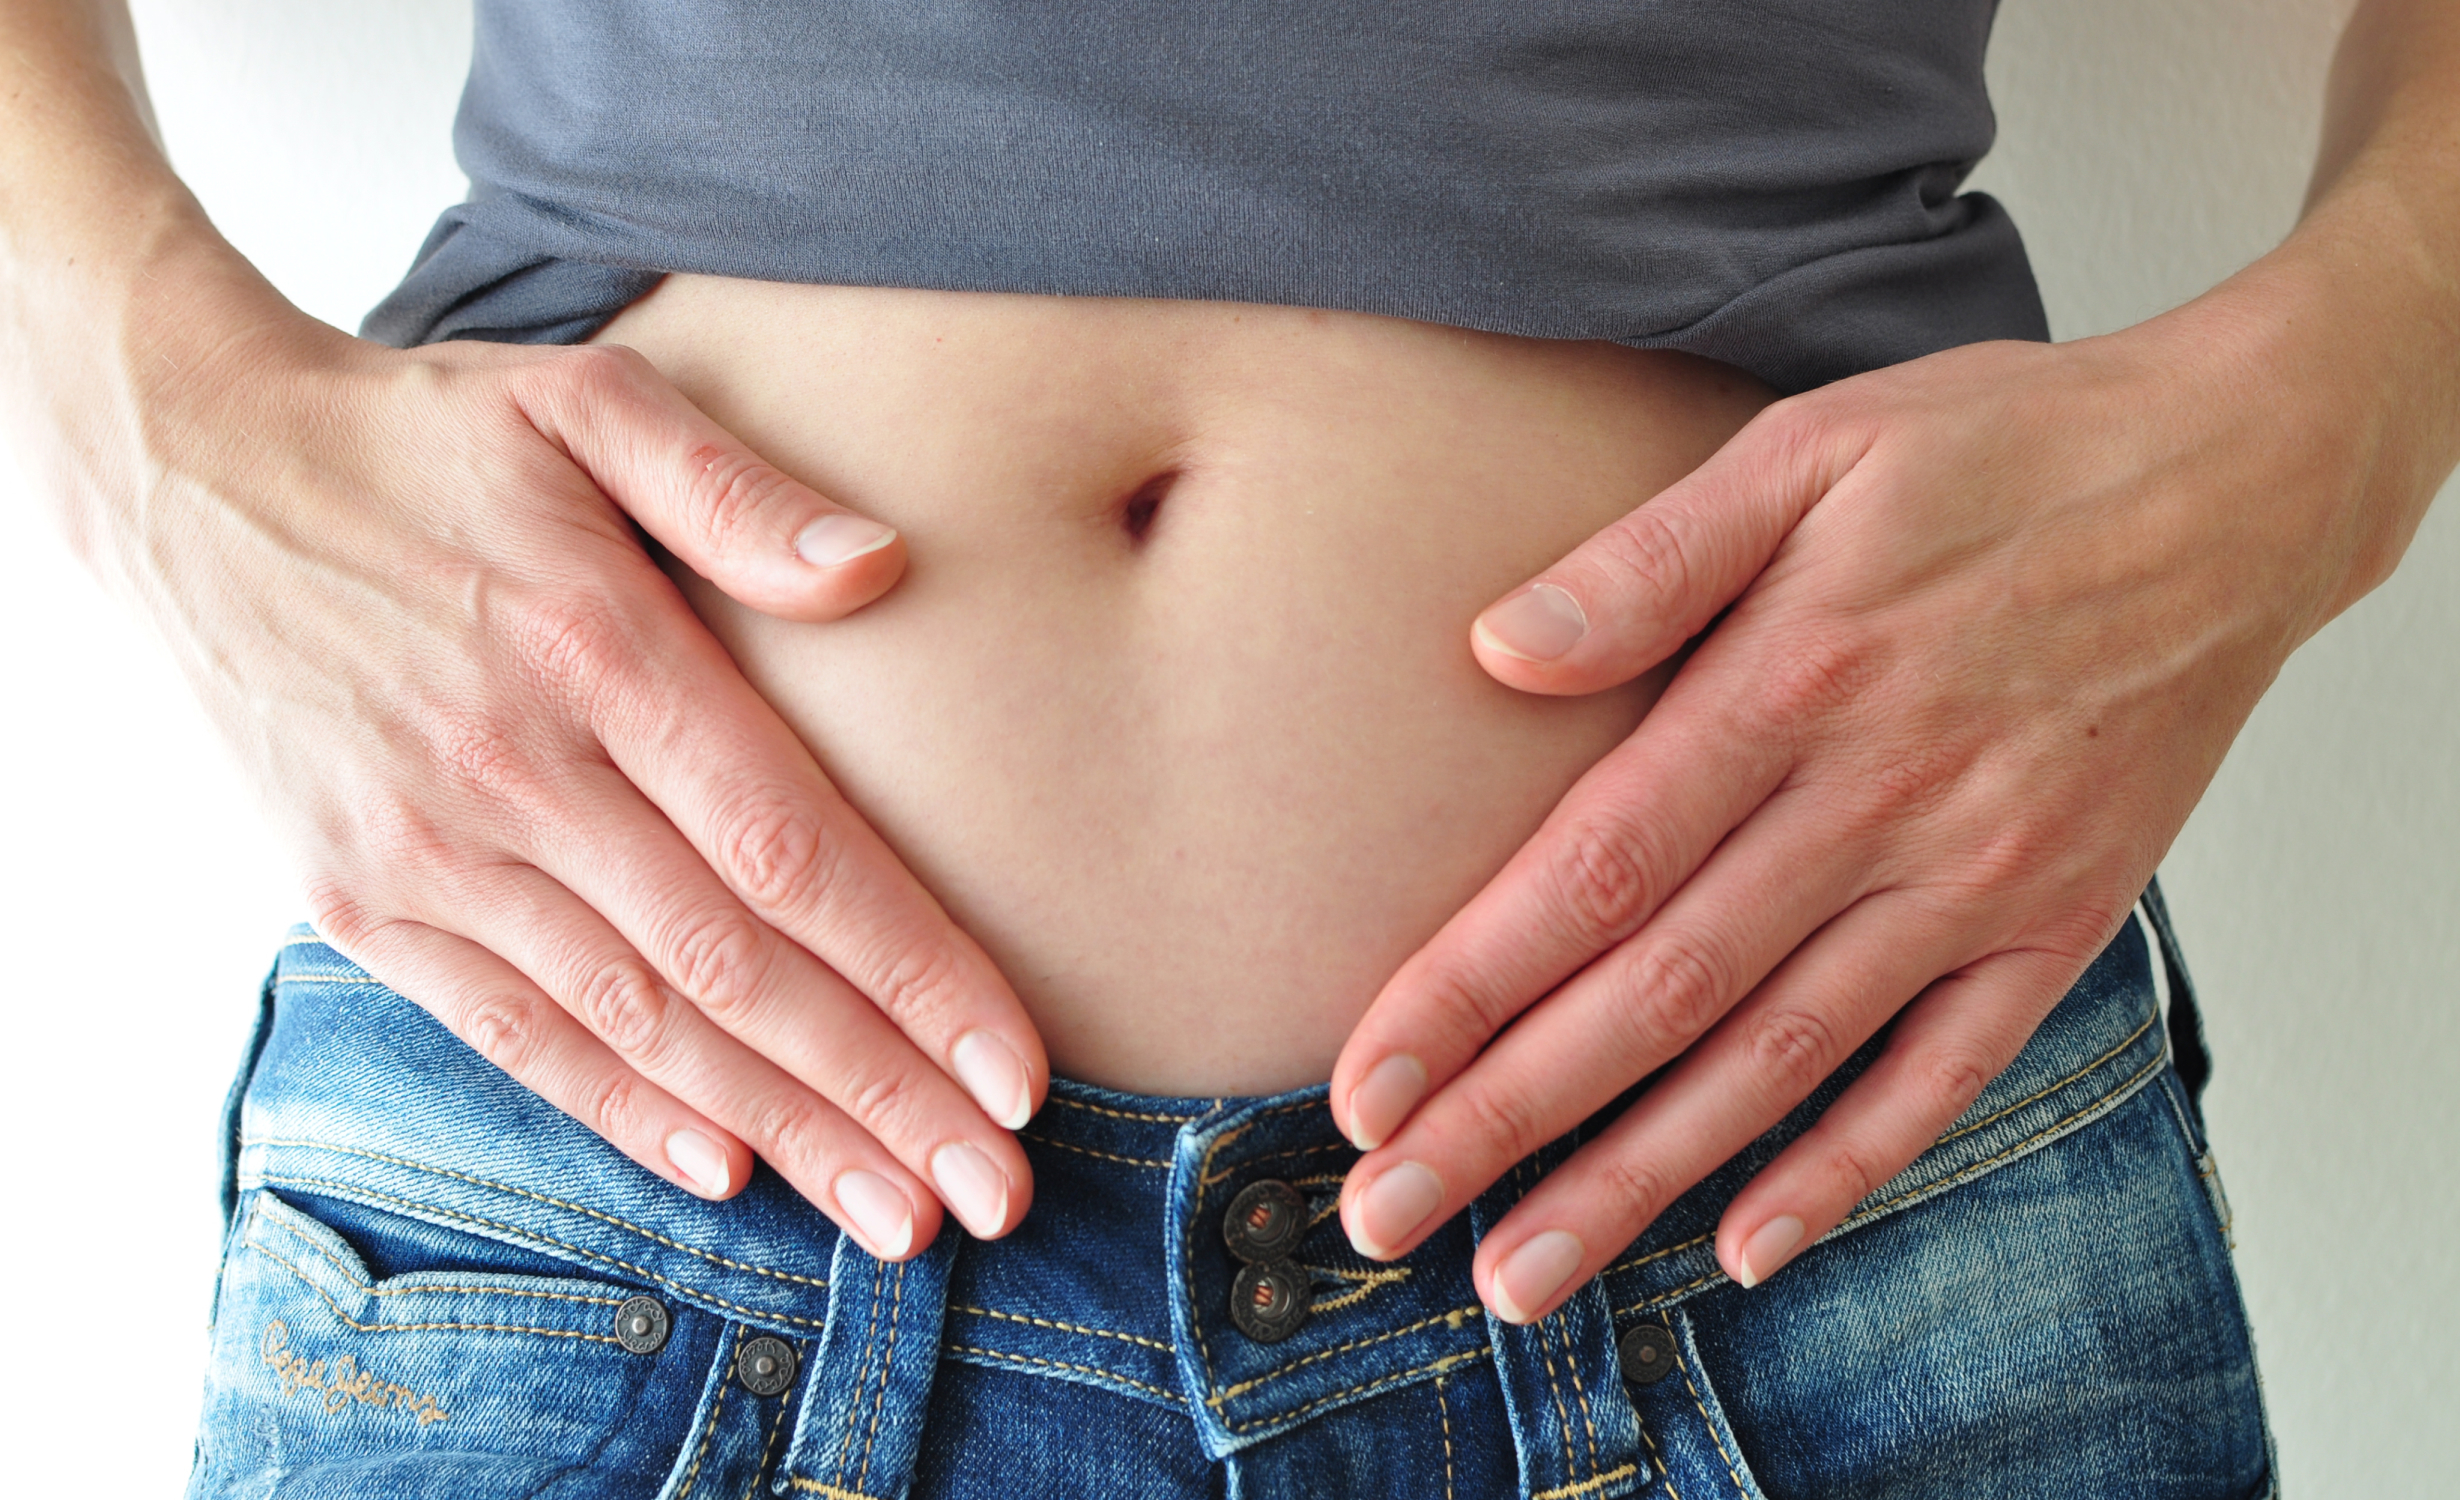 A close-up image of a person’s midsection with their hands resting on their bloated stomach, illustrating symptoms of stomach bloating conditions.